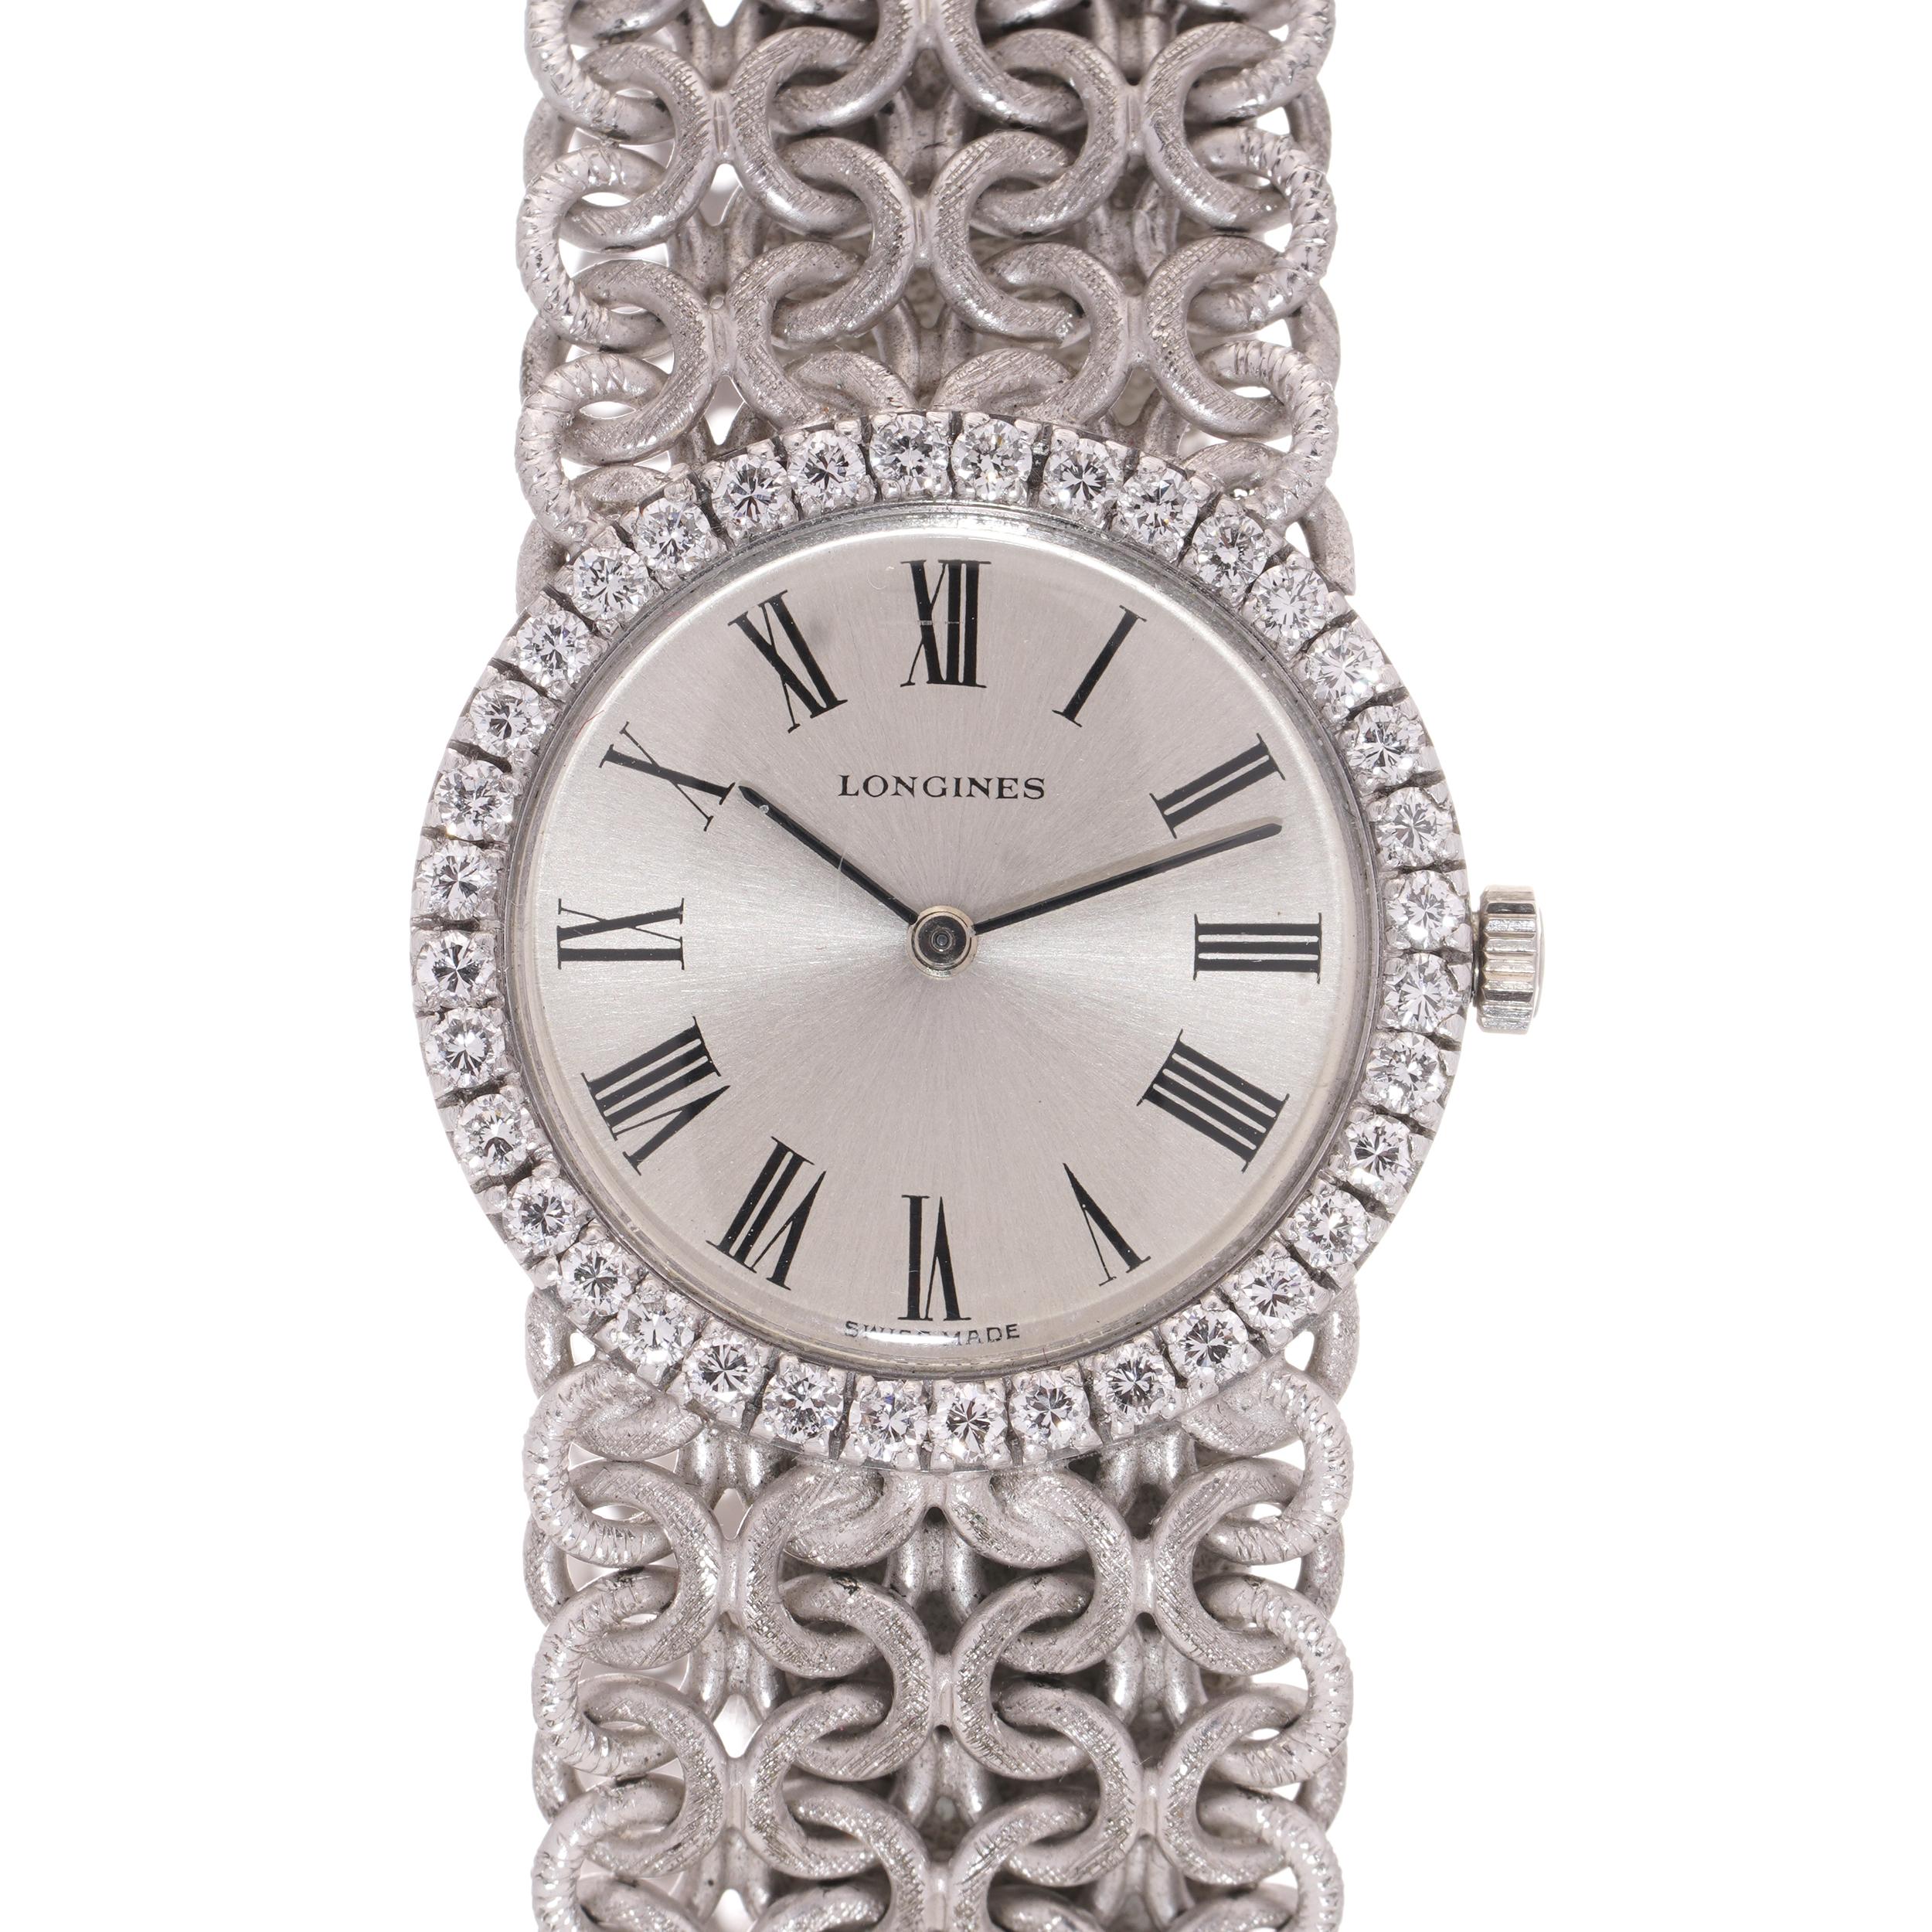 Longines 18kt. white gold ladies' wristwatch with diamond-set bezel.
Made in Switzerland. Circa 1970's

Year 1970s
Item Specifics:
Case Diameter (without crown): 23 mm
Case material: 18kt. white gold
Bracelet material: 18kt. white gold
Bezel: 18kt